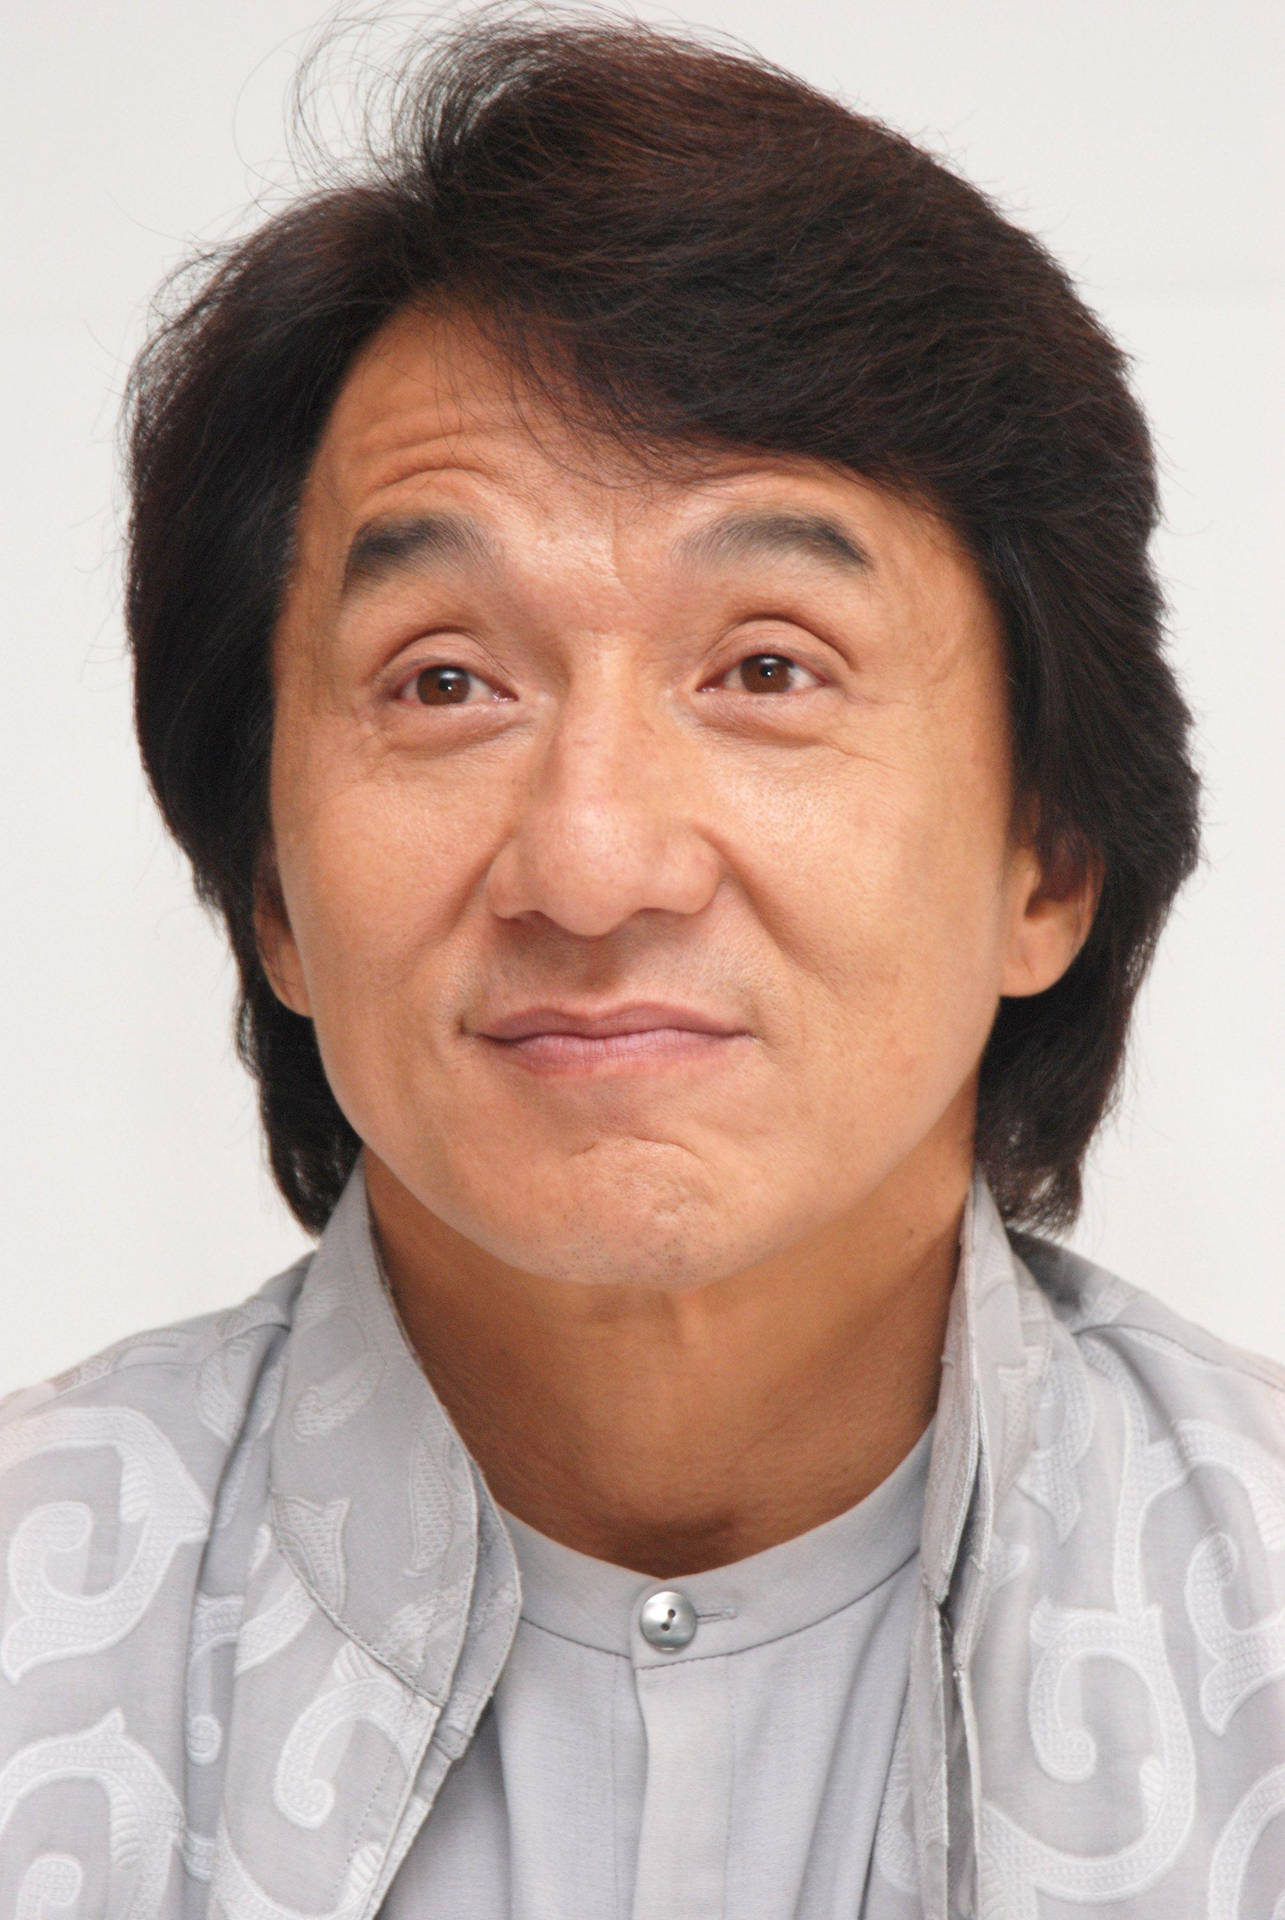 Surprised Jackie Chan in Close-Up Shot Wallpaper